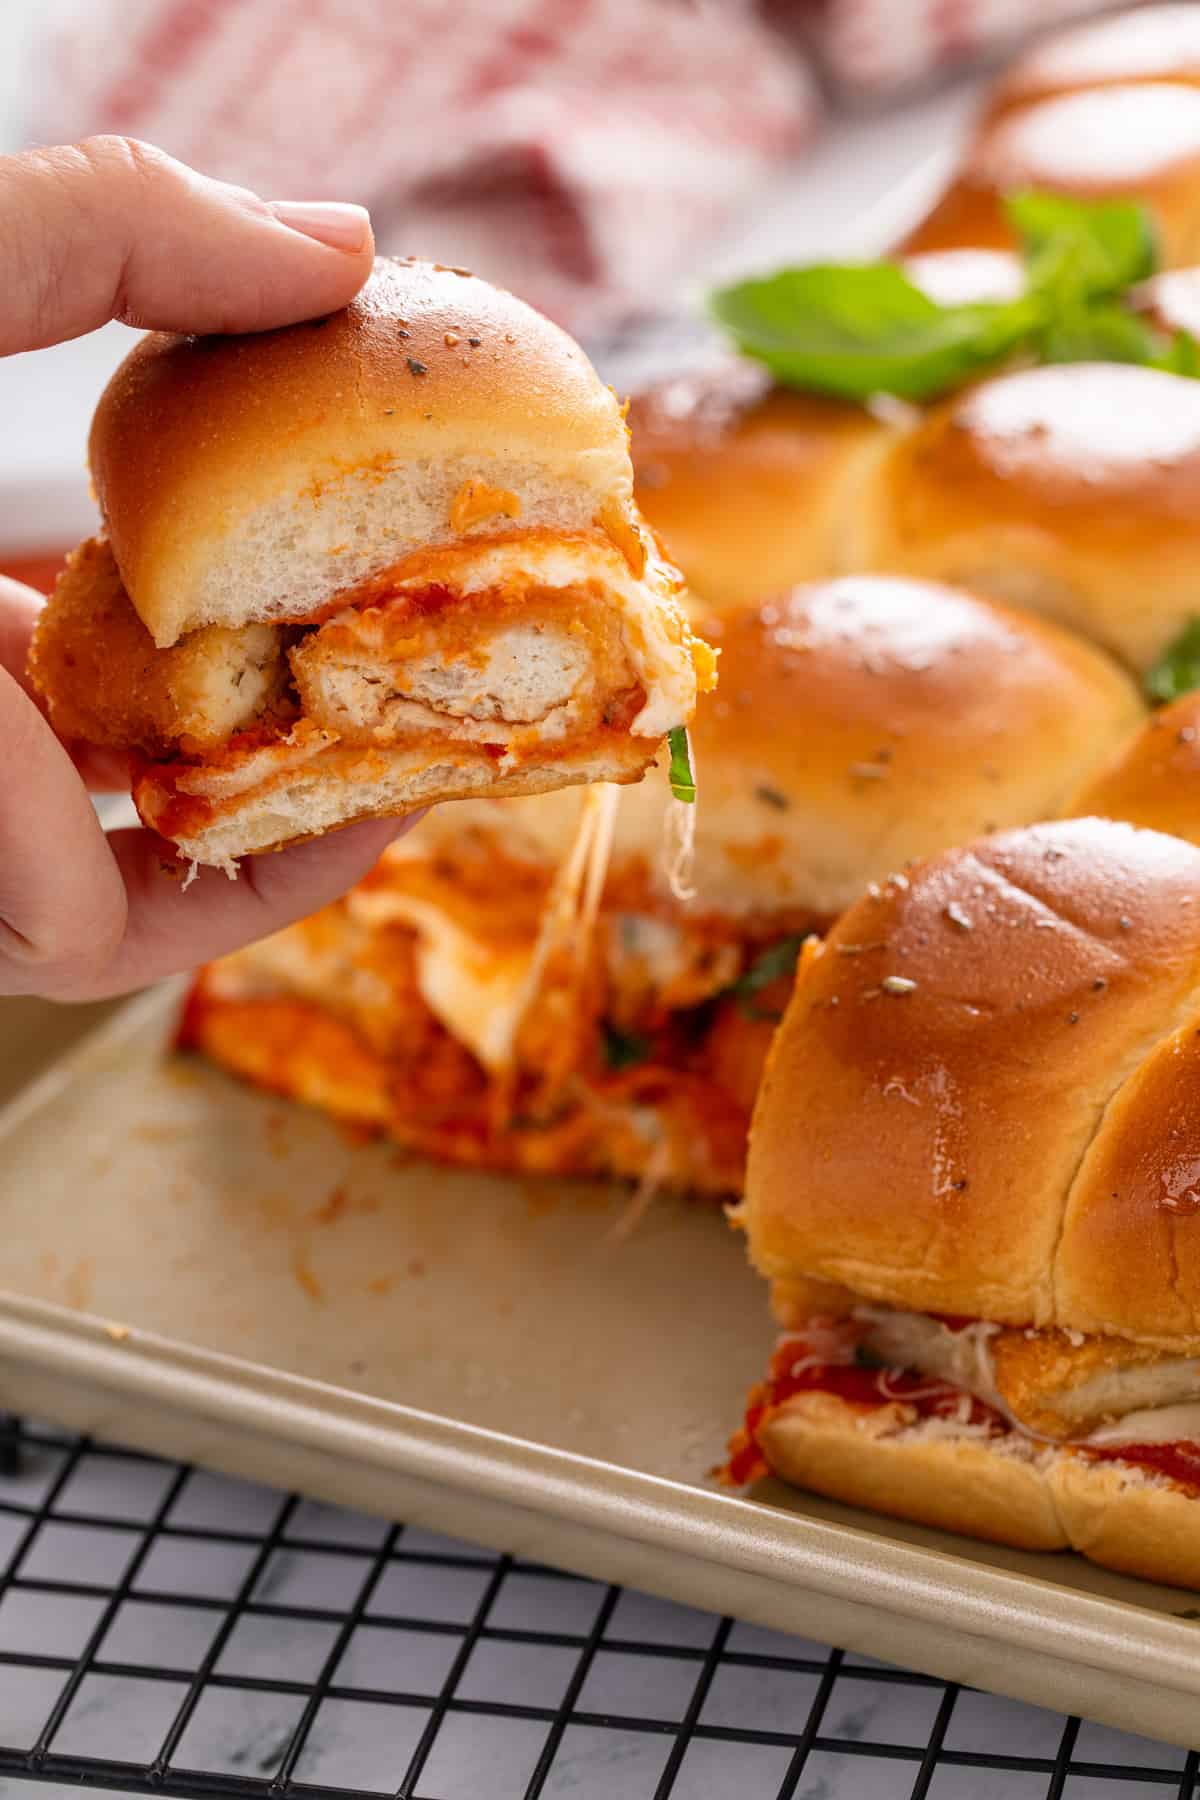 Hand picking up a chicken parmesan slider from the pan of sliders.